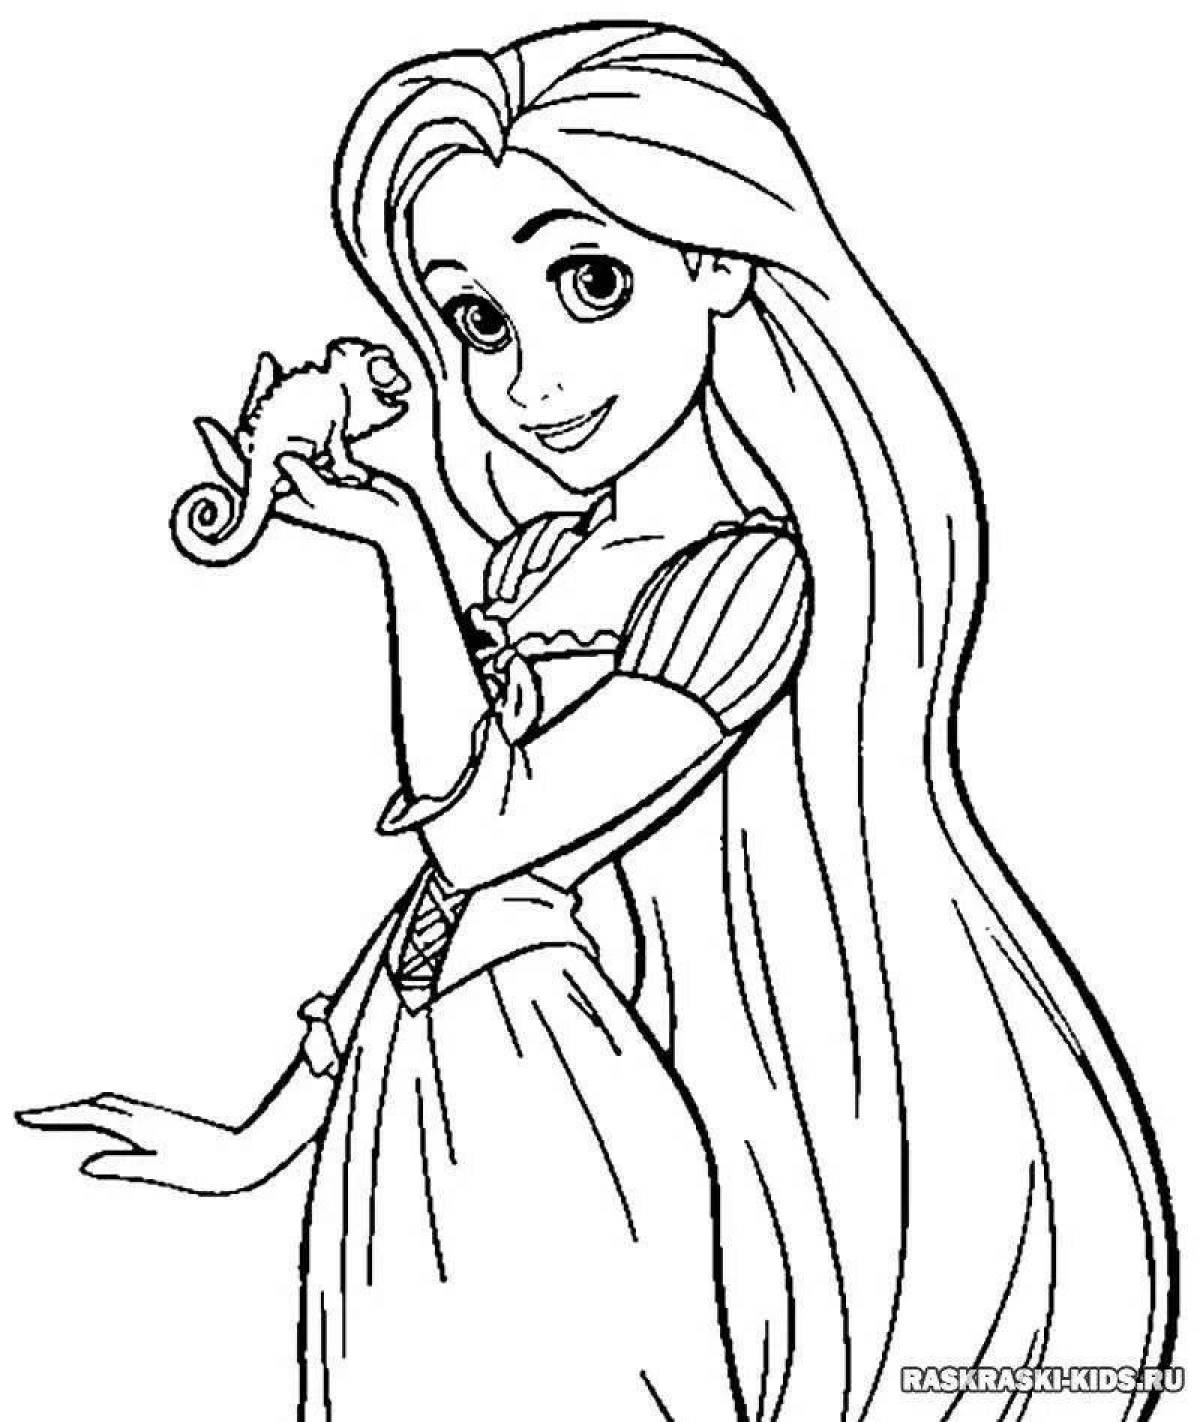 Great rapunzel coloring book for kids